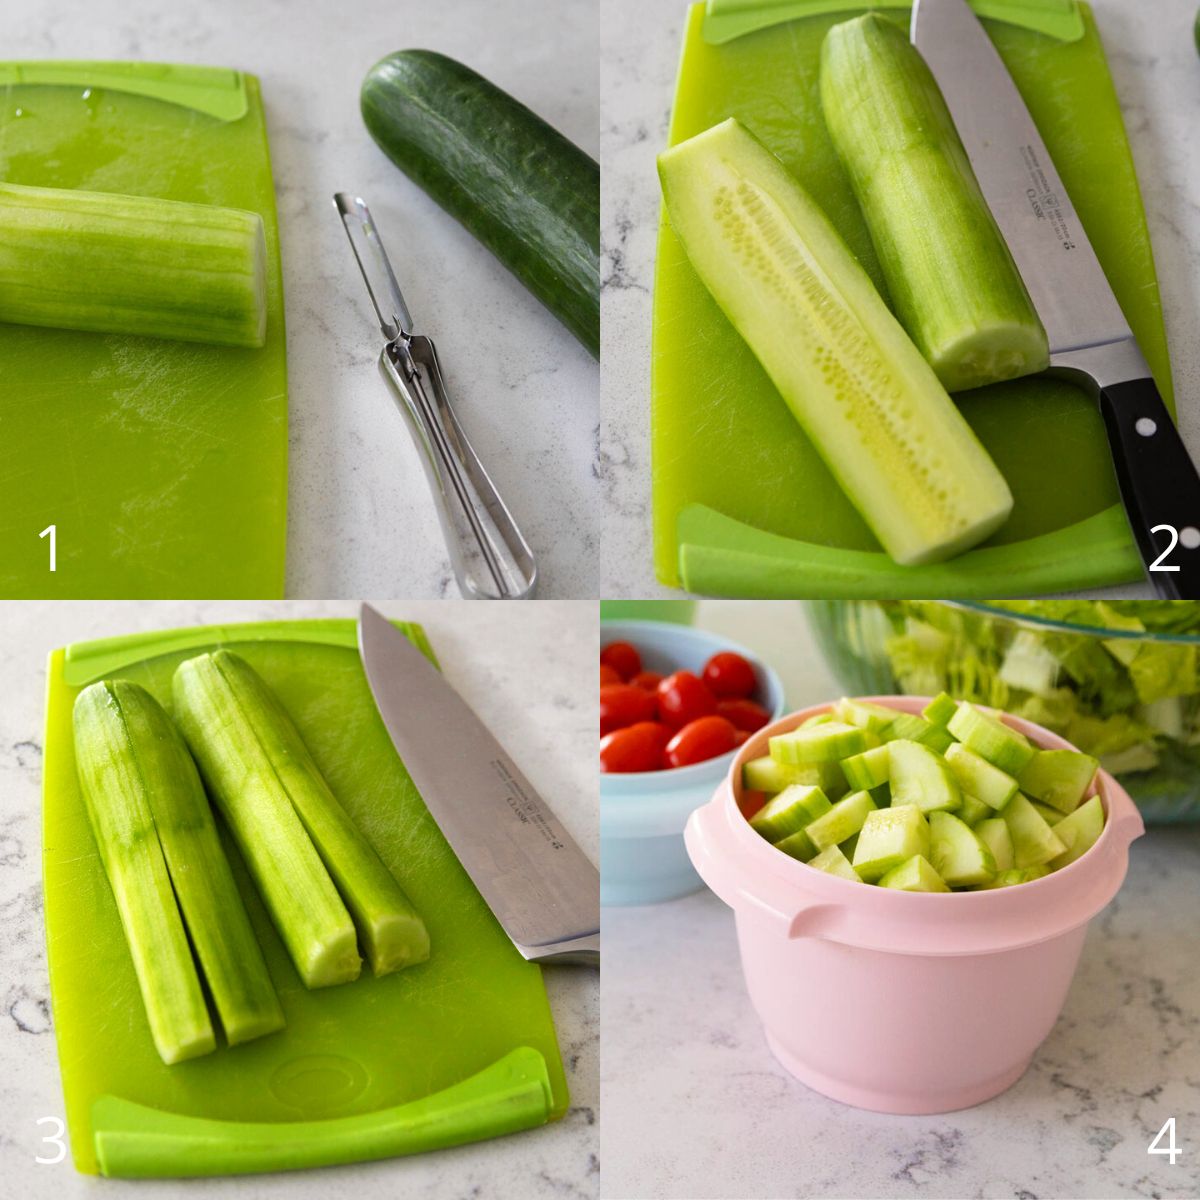 The step by step photos show how to peel, slice and chop a fresh cucumber into chunks for a salad.